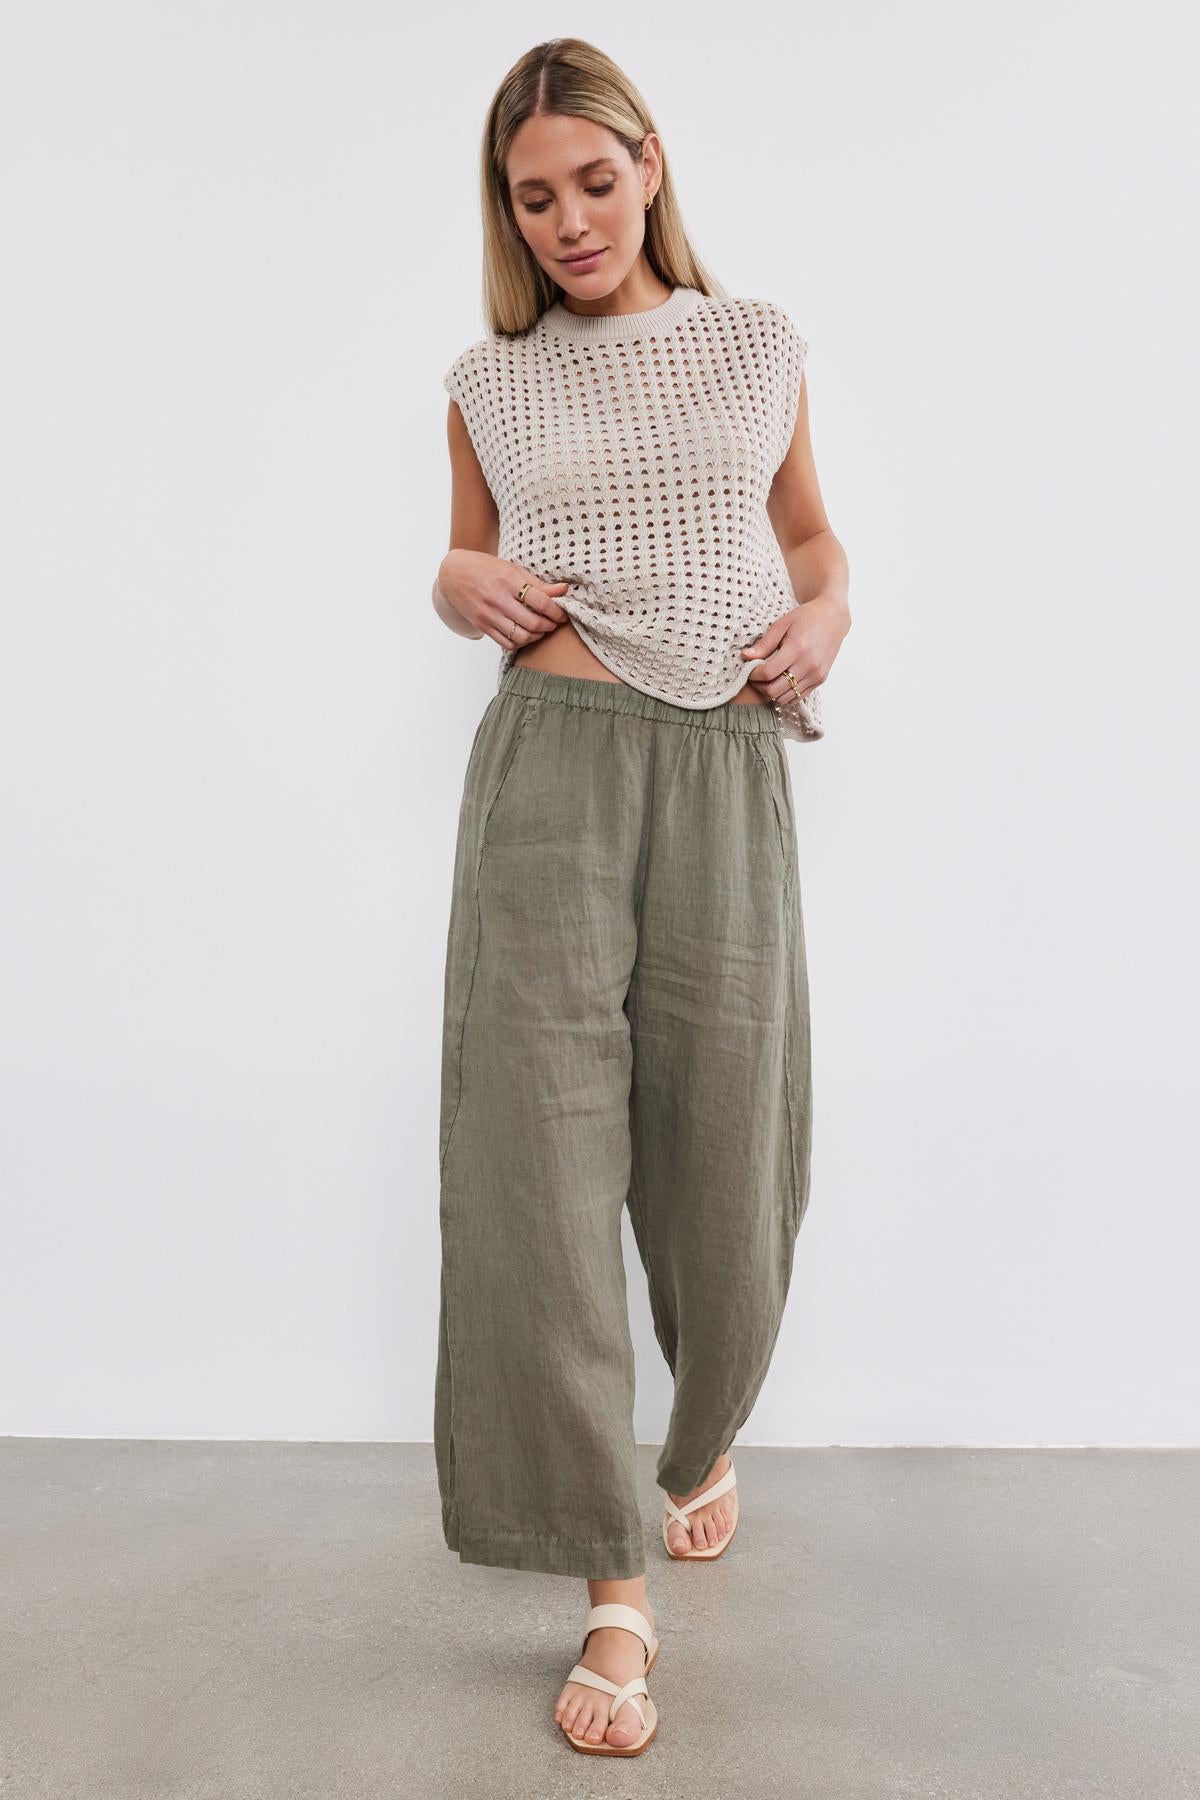 A person stands against a white background wearing a sleeveless beige top and Velvet by Graham & Spencer's LOLA LINEN PANT with an elastic waist, paired with light sandals. They are looking down and slightly adjusting their top.-36910043037889